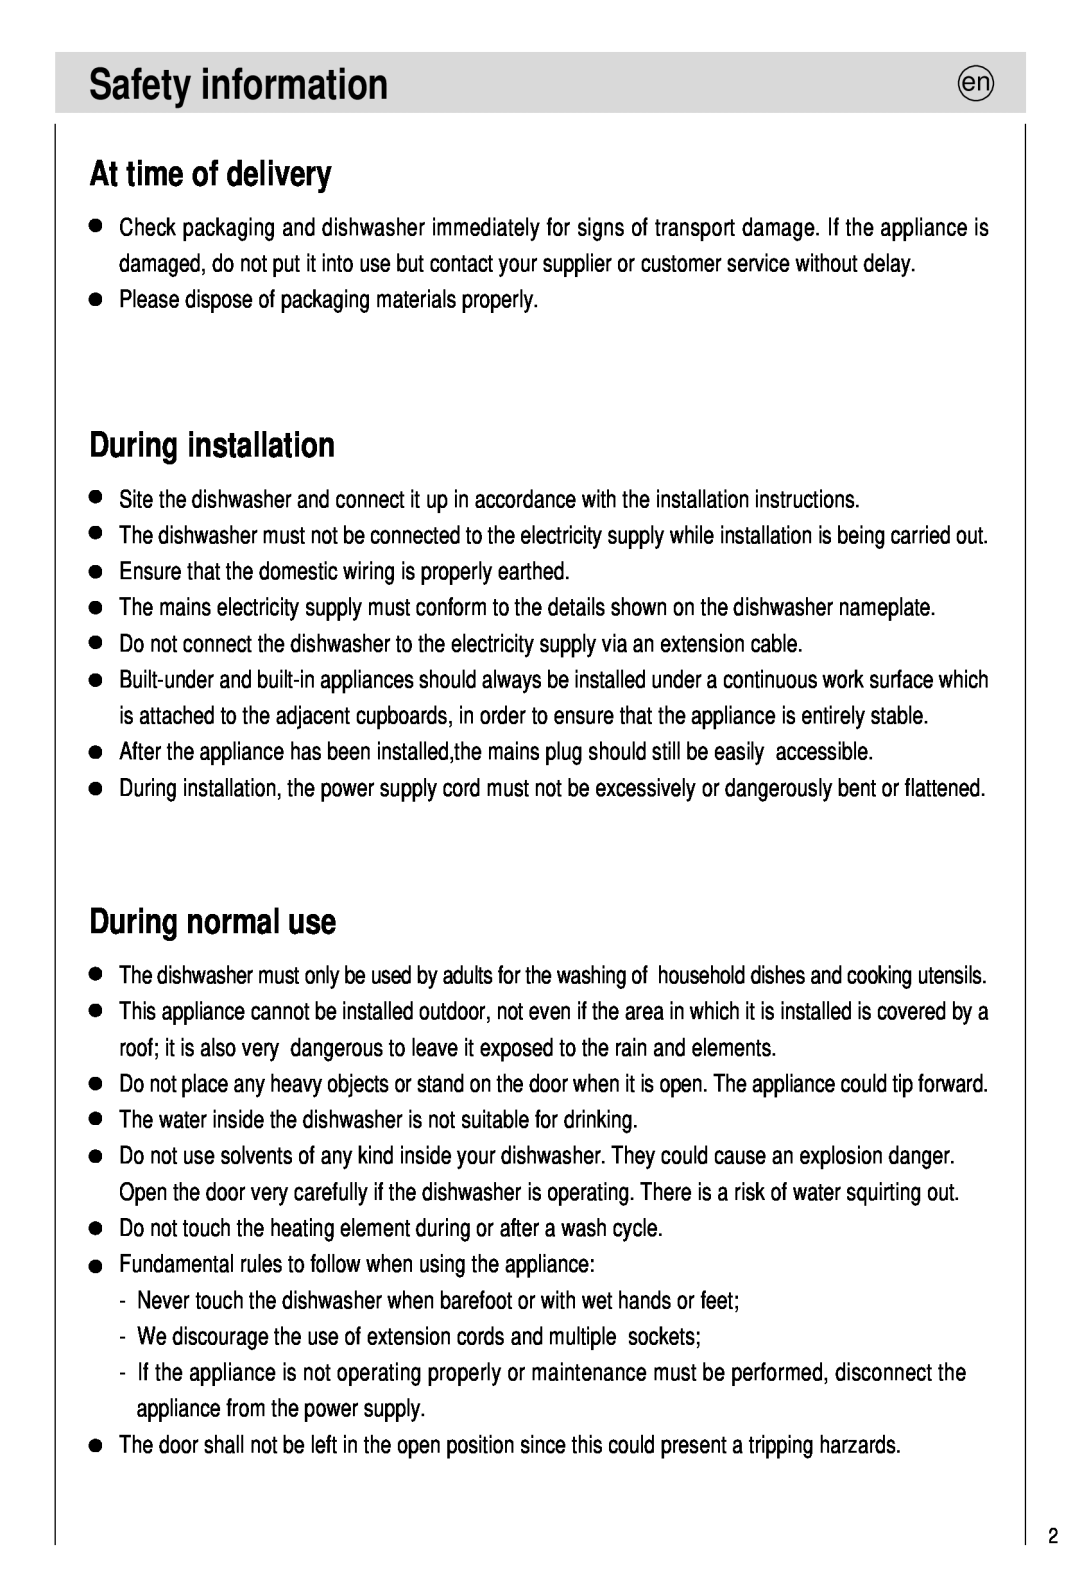 Haier 0120505609 manual Safety information, At time of delivery, During installation, During normal use 